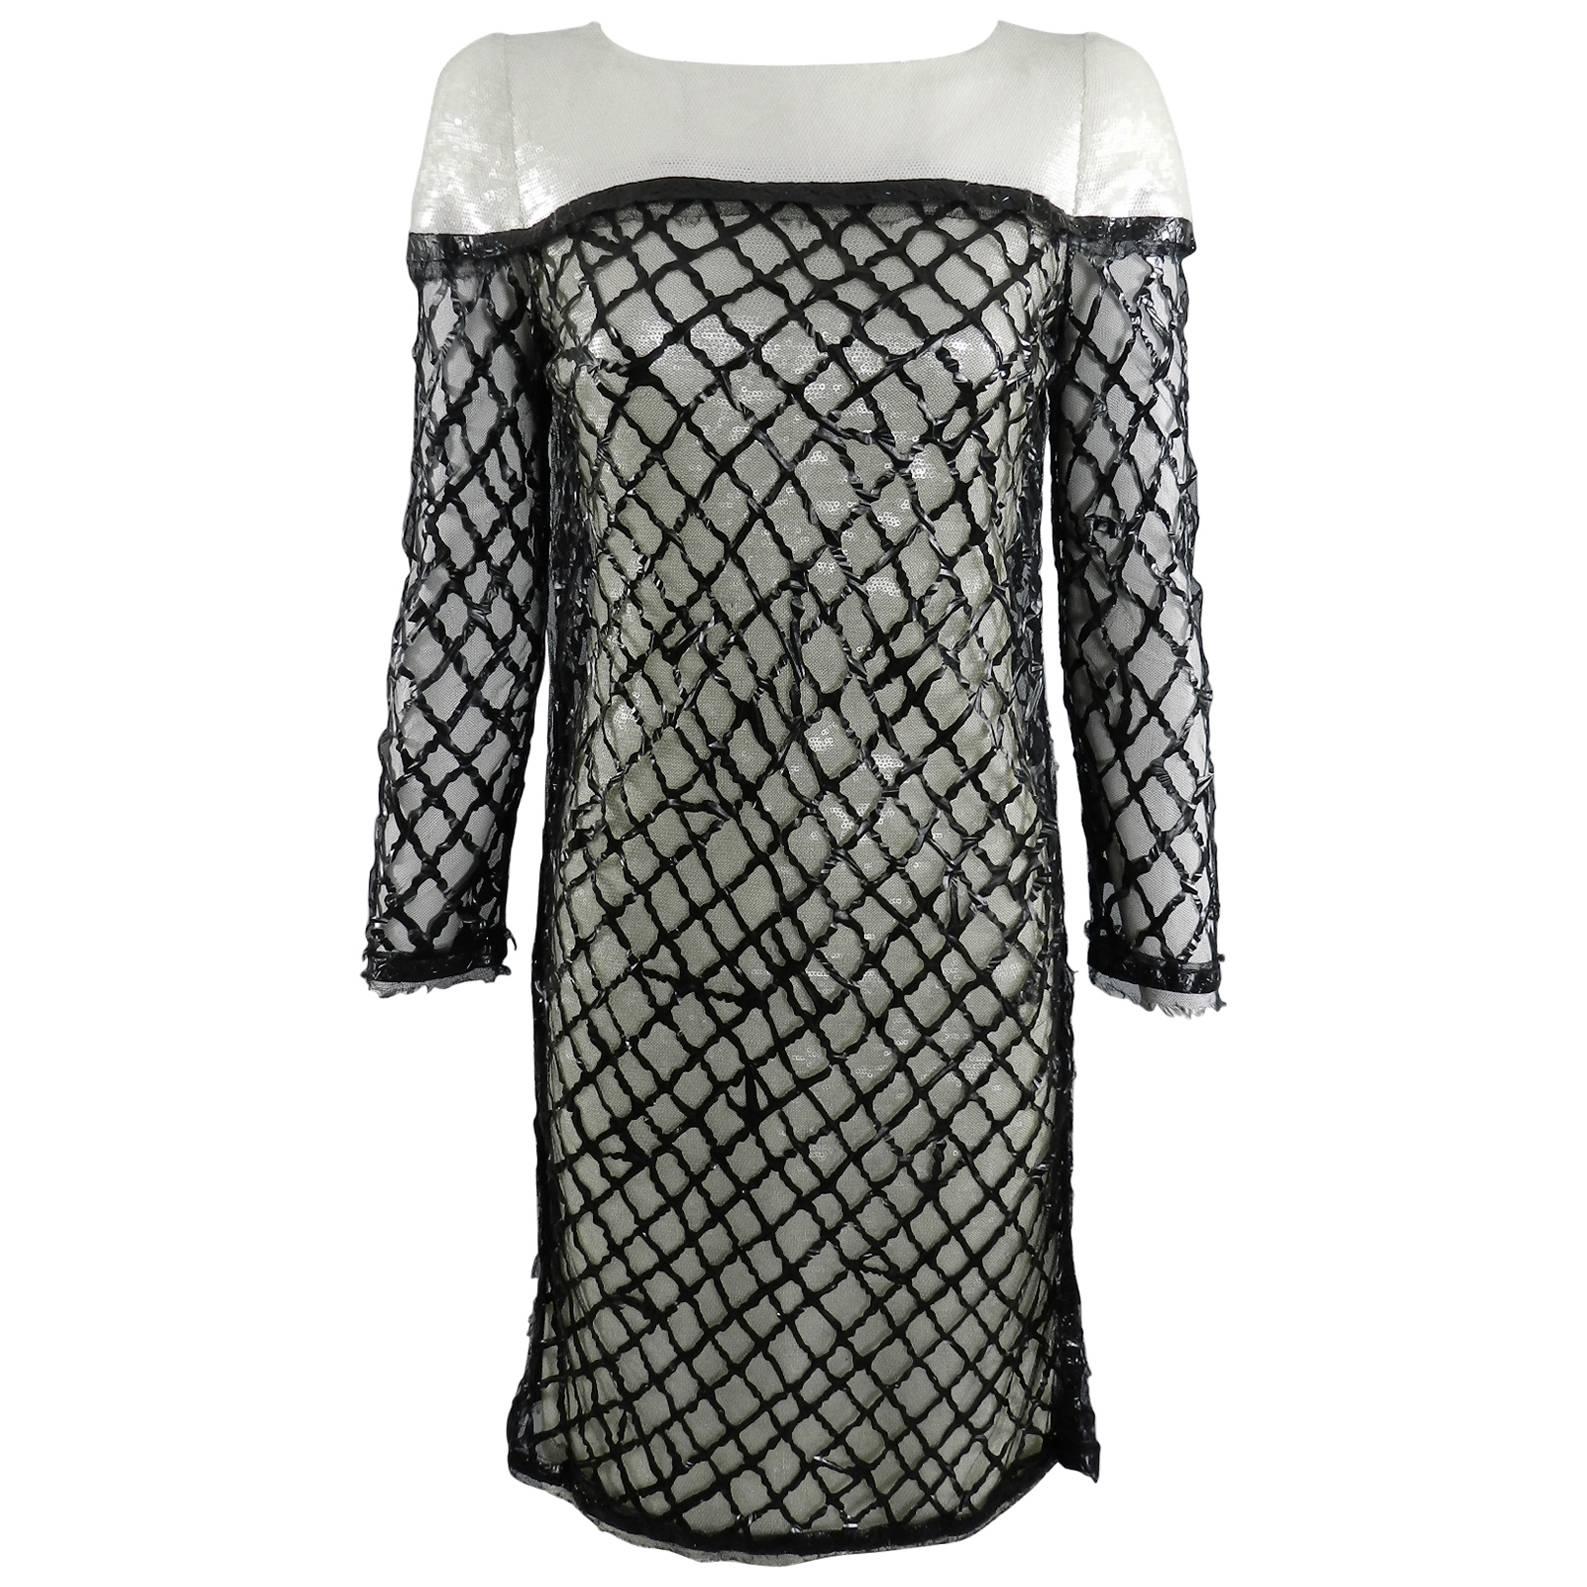 Chanel 09P White Sequin Runway Dress with Black Rubber Mesh Overlay